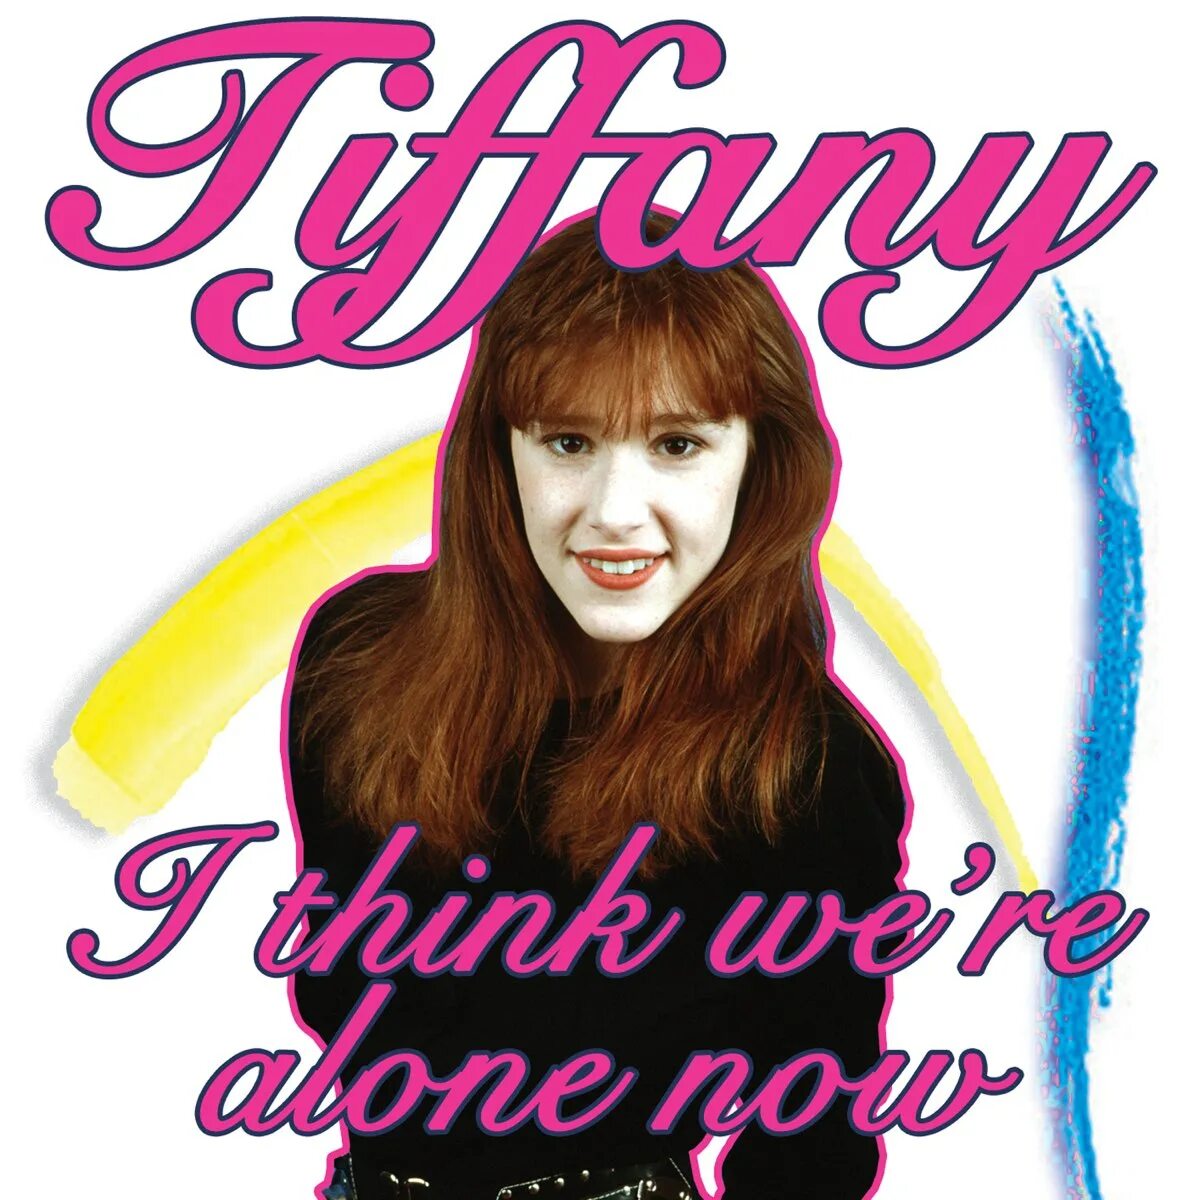 Tiffany i think we're Alone Now. Альбомом Тиффани. Tiffany альбом. Тиффани Дарвиш.